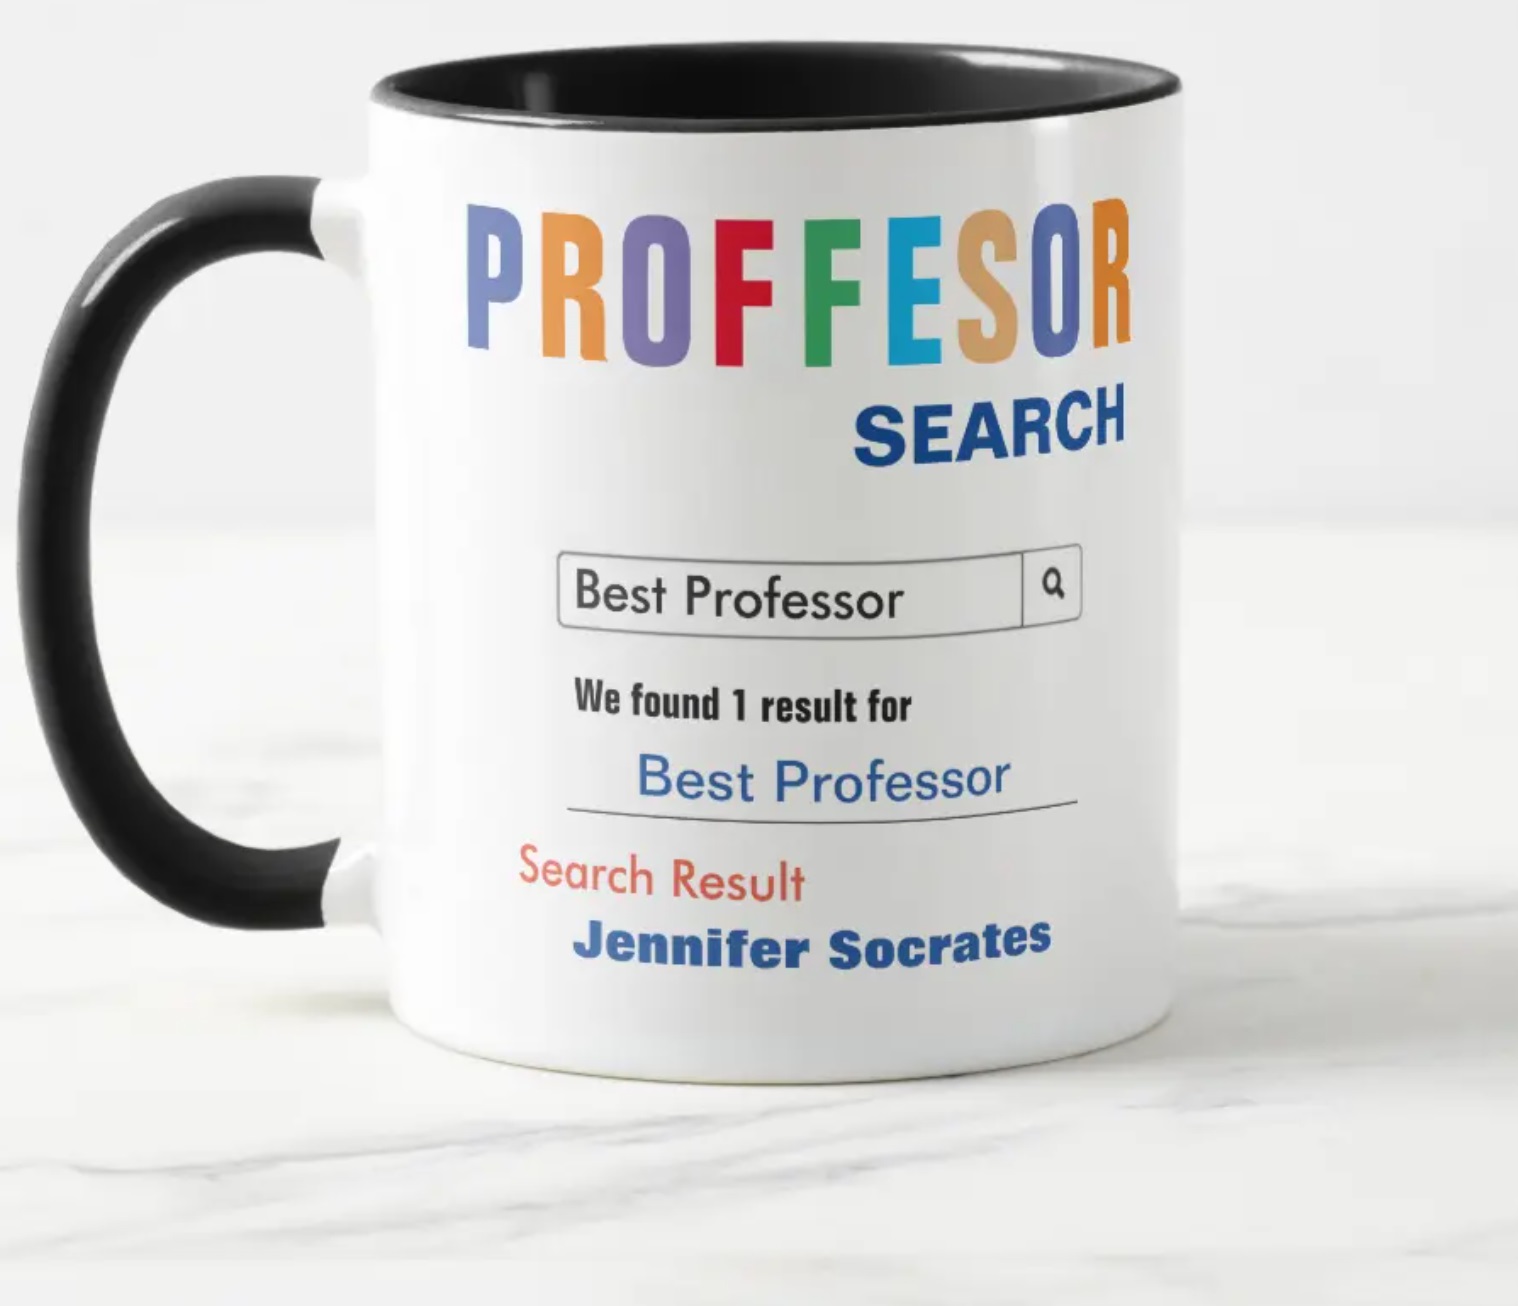 Best Professor Search Mug from AZEZcom design by Amelia Carrie